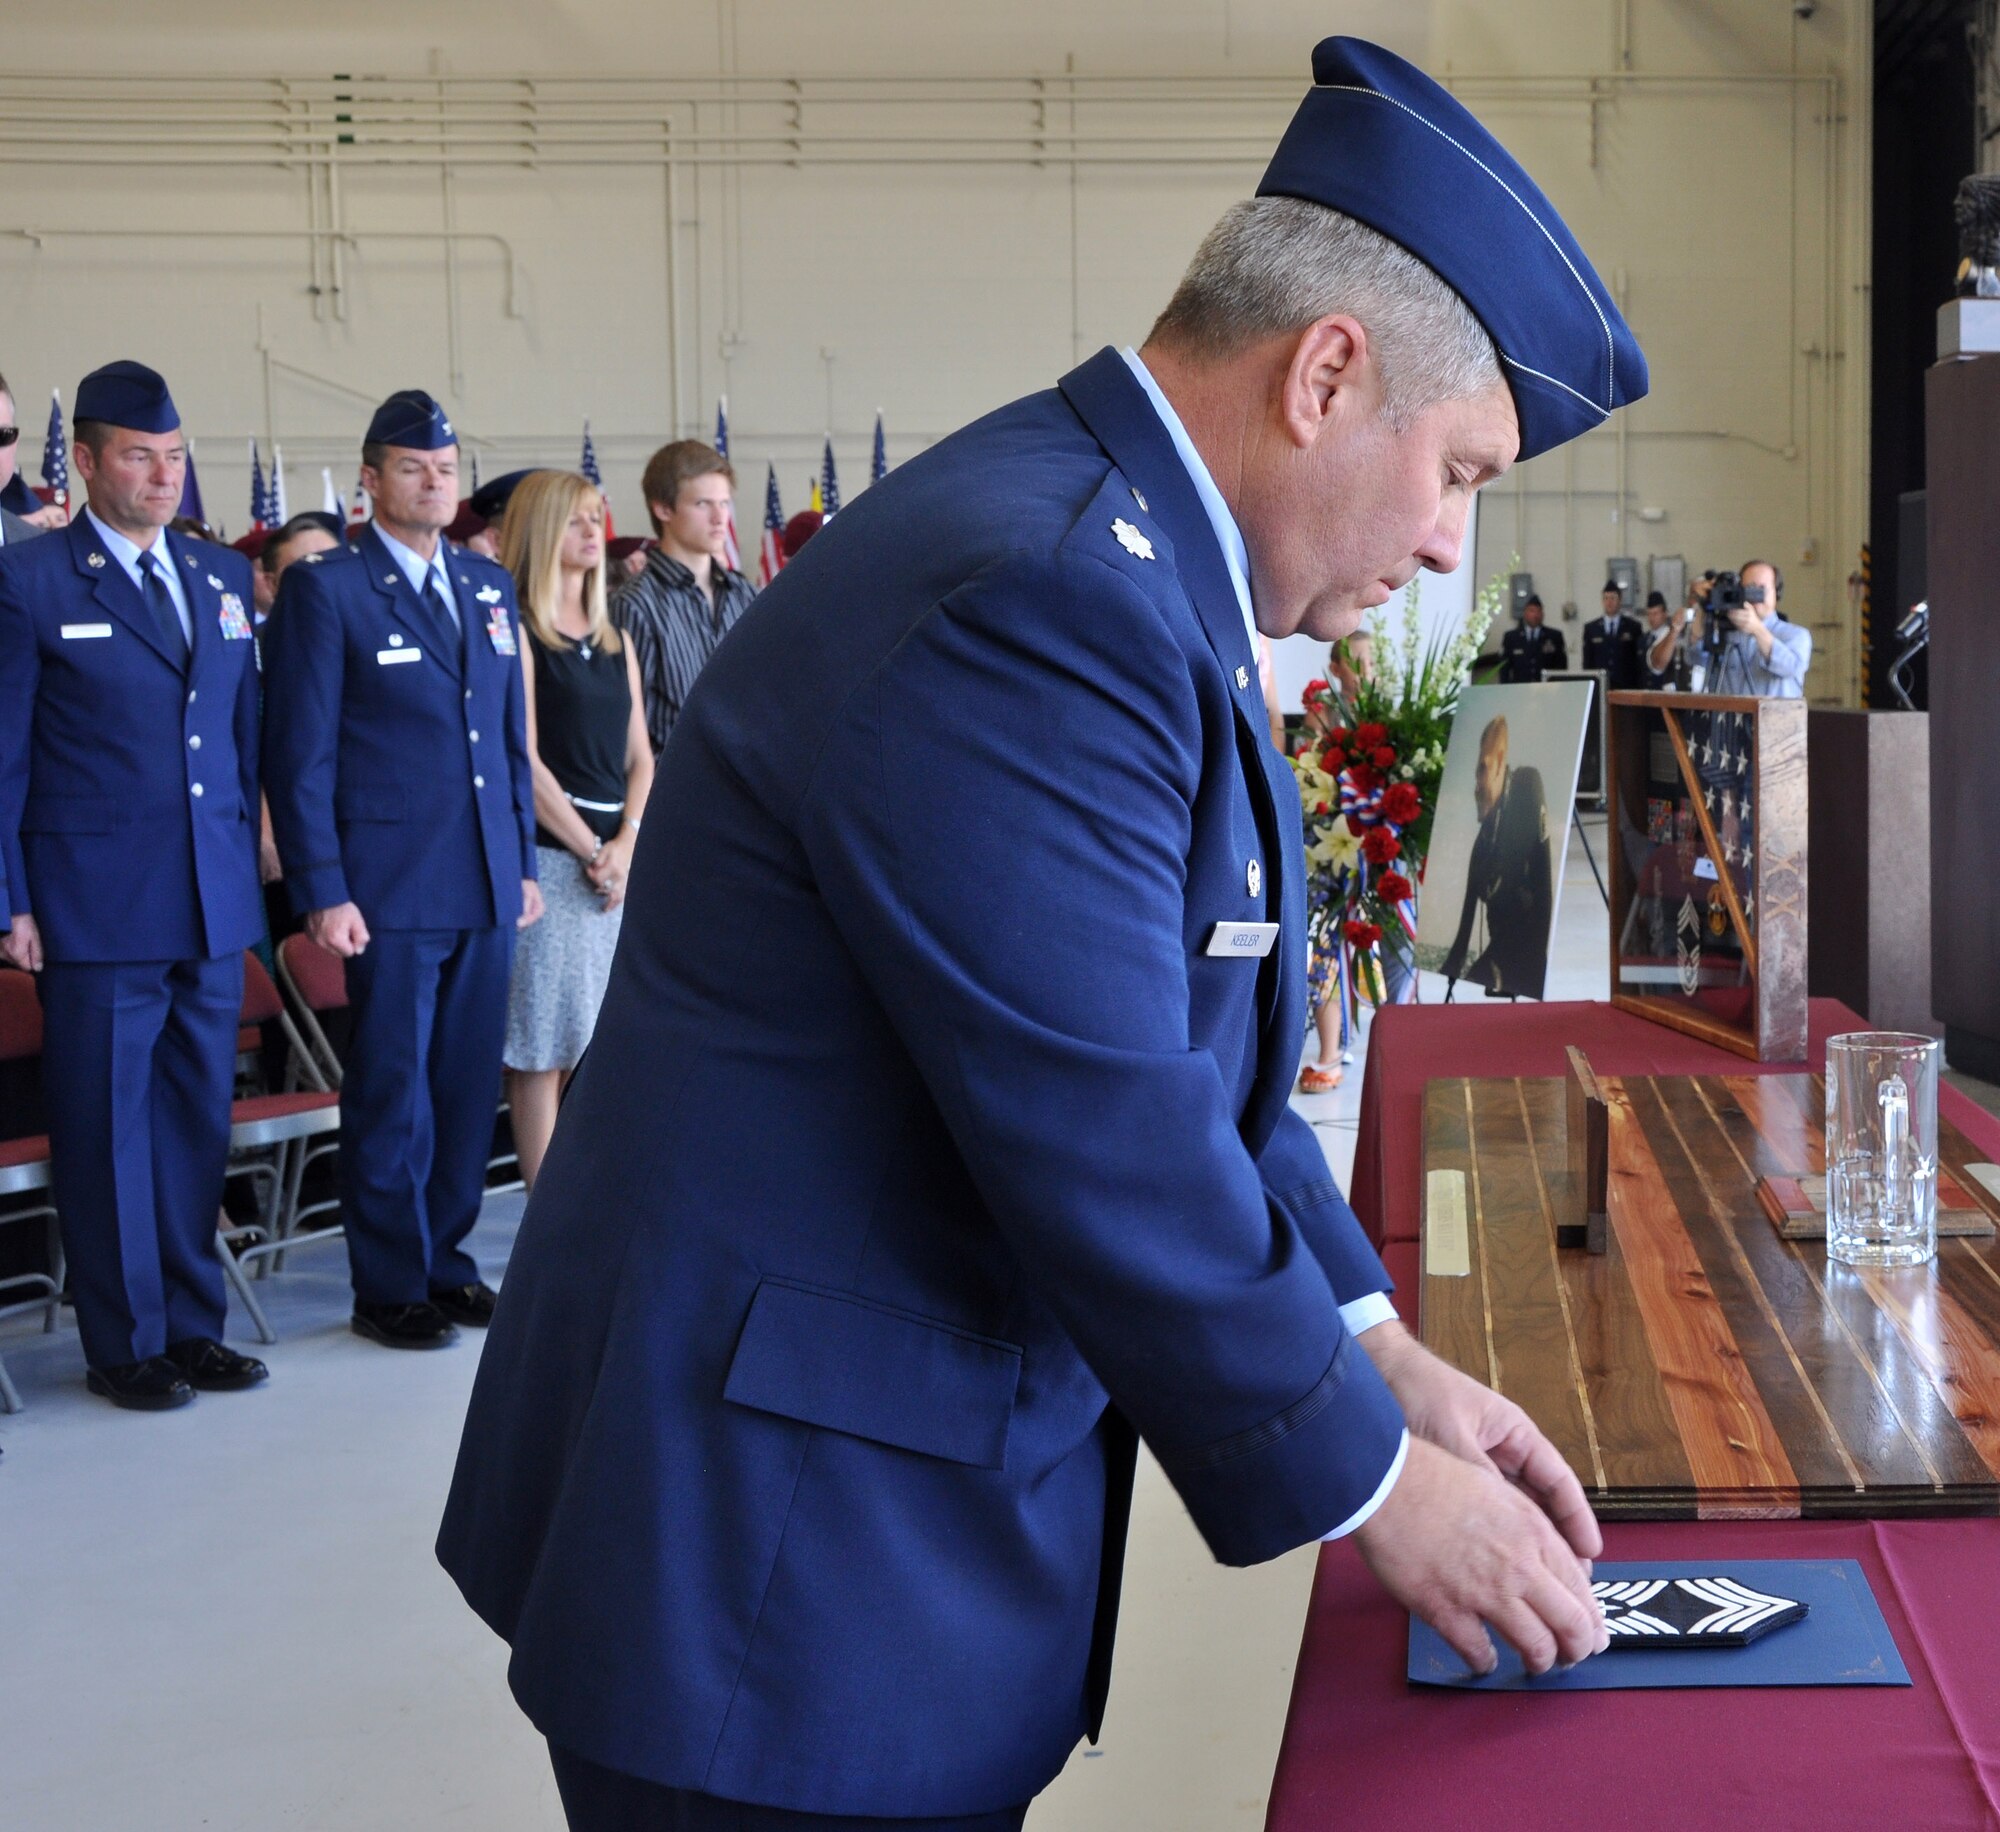 Lt. Col. John Keeler, 306th Rescue Squadron commander, places chief master sergeant stripes on a table during the memorial ceremony of Chief Master Sgt. Nicholas McCaskill, April 27, 2013. McCaskill was killed in Afghanistan April 6, 2013 while he was performing his civilian job as a security contractor. He was promoted to chief master sergeant on Feb. 1, 2013 and was going to have his formal chief pinning ceremony during the May Unit Training Assembly weekend. (U.S. Air Force Photo/ Staff Sgt. Sarah Pullen)